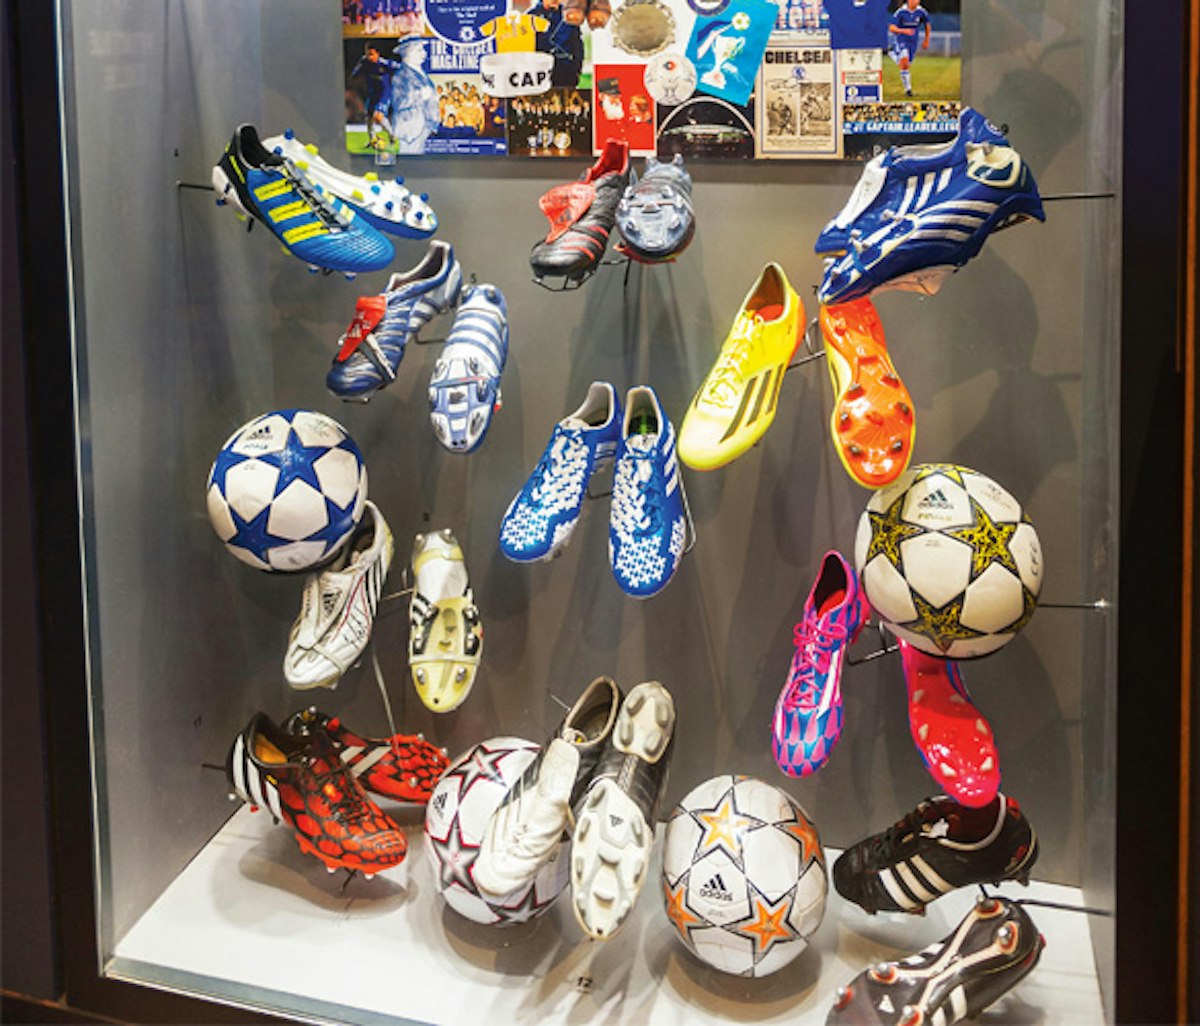 Display case of various soccer cleats and balls with memorabilia in the background.